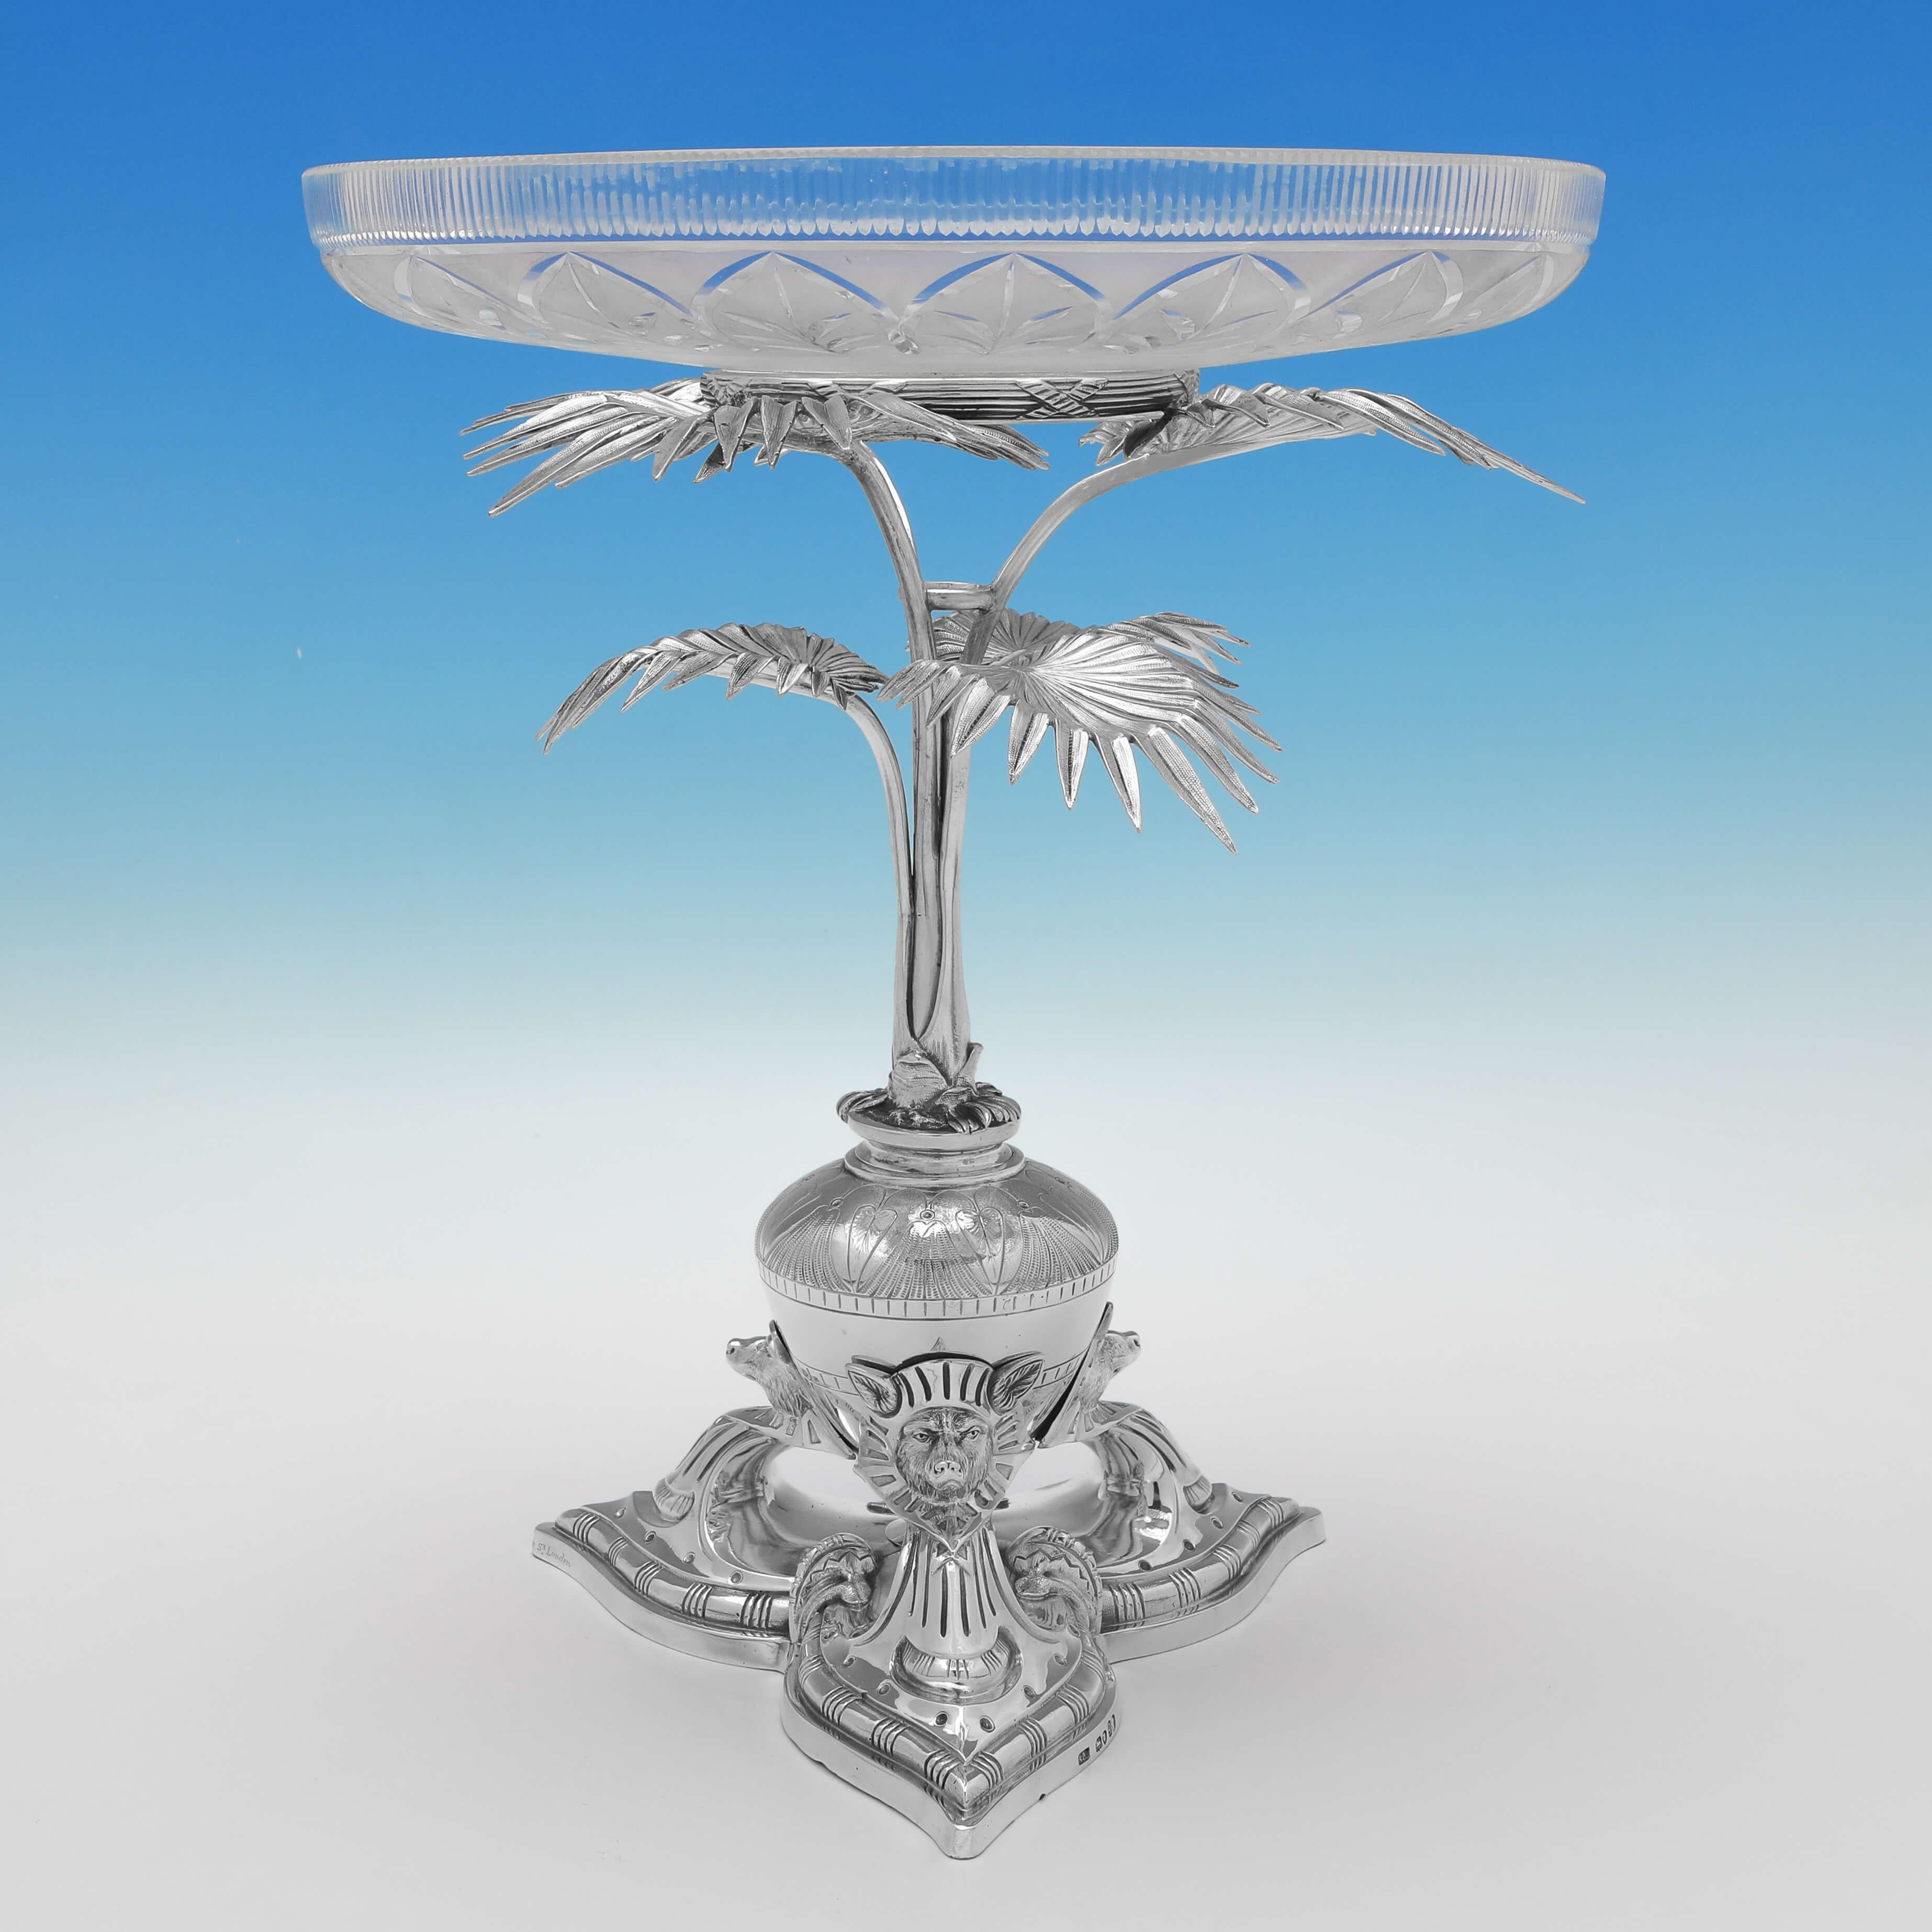 Hallmarked in London in 1871 & 1874 by Alexander Macrae, this striking pair of Antique Sterling Silver Compotes (or Dessert Stands), are in the Egyptian Revival style, featuring Anubis masks to each foot, and palm tree supports to the glass dishes.